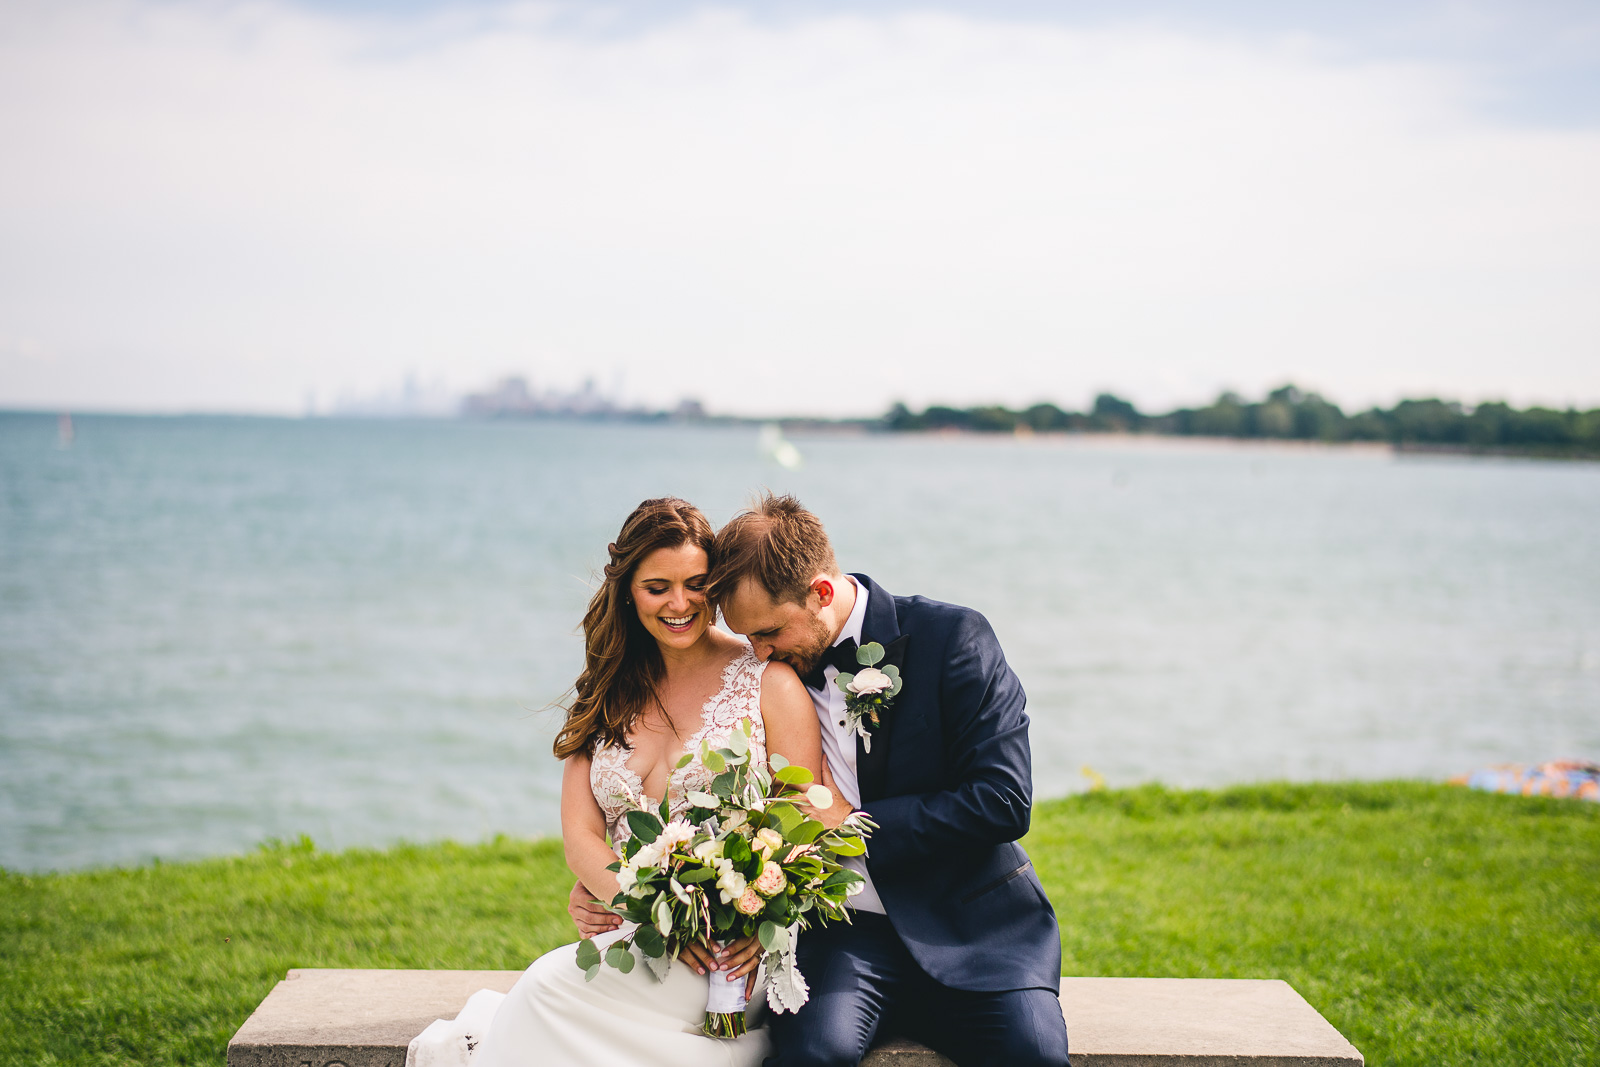 86 chicago wedding photographer best portraits during weddings review - 2018 in Review // My Favorite Chicago Wedding Photography Portraits